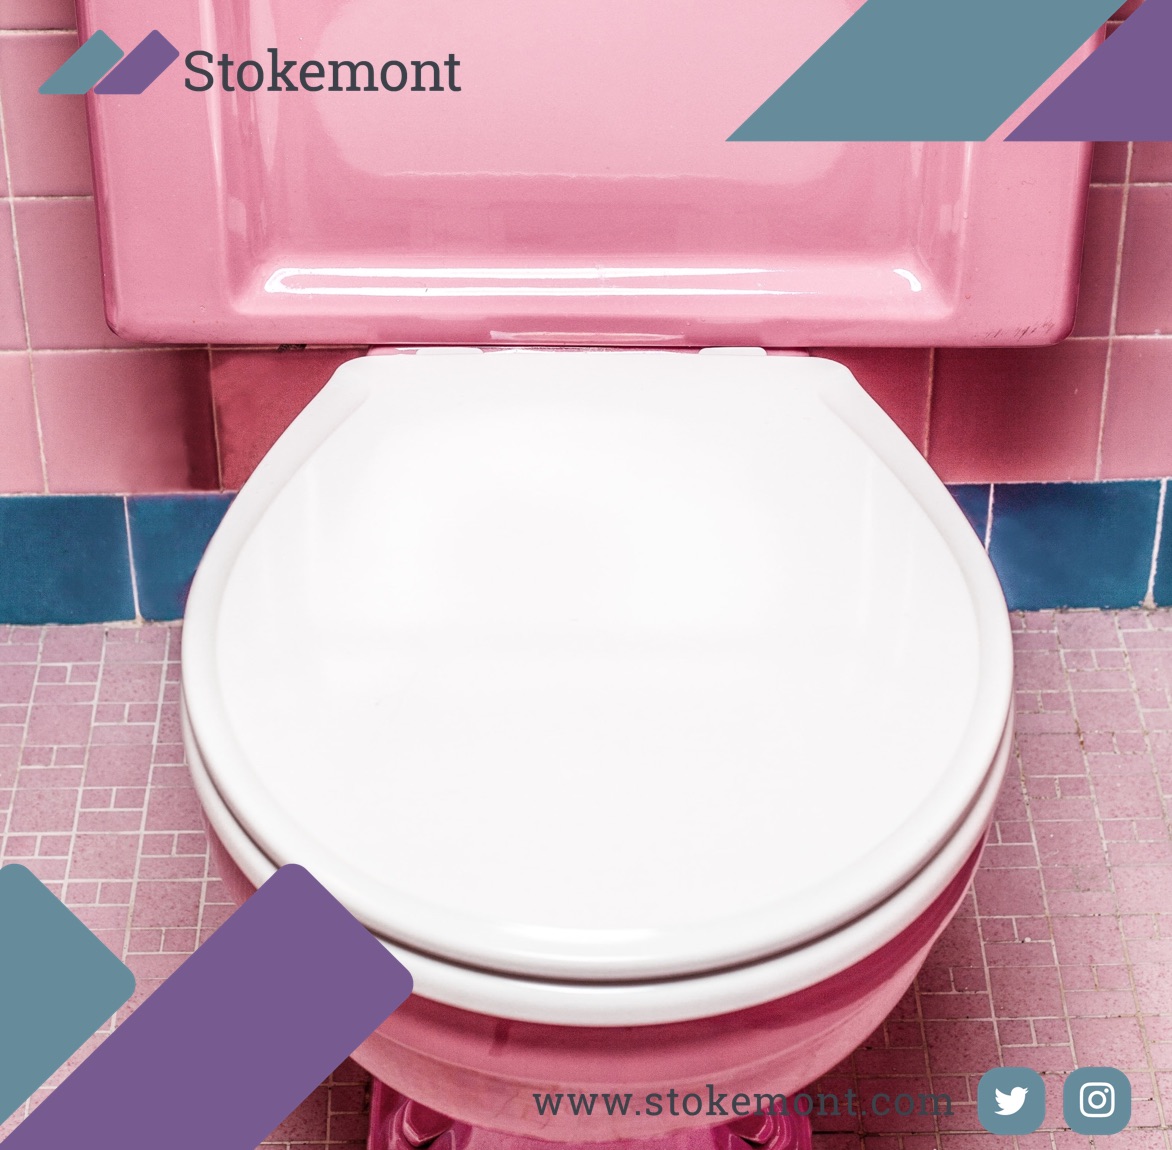 A #common #misunderstanding is that #toilets cannot #function without #water, this is a #misconception, in fact, there are numerous #toilets on the #market that use and need no #water